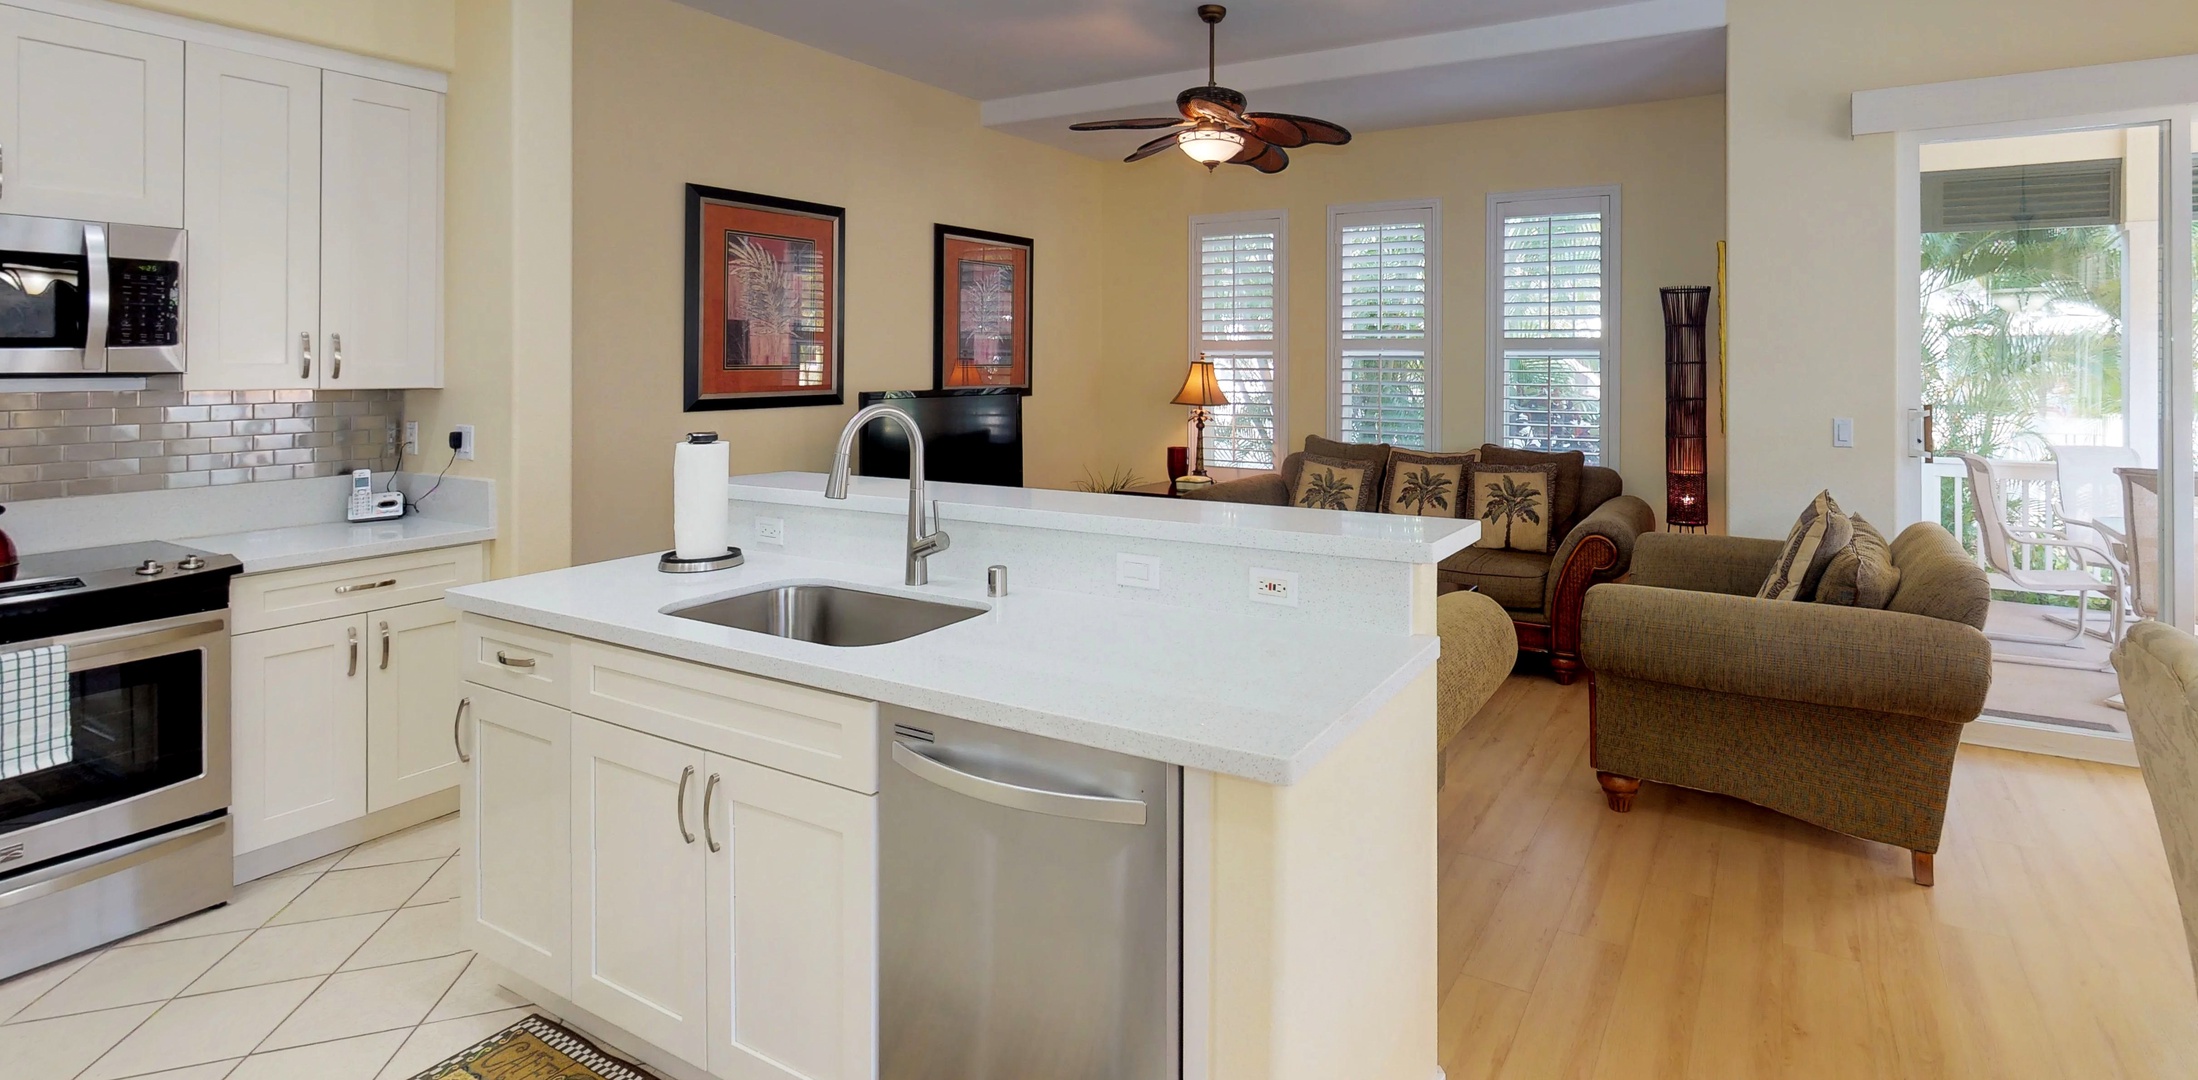 Kapolei Vacation Rentals, Coconut Plantation 1078-3 - The kitchen is the heart of the home for entertaining.